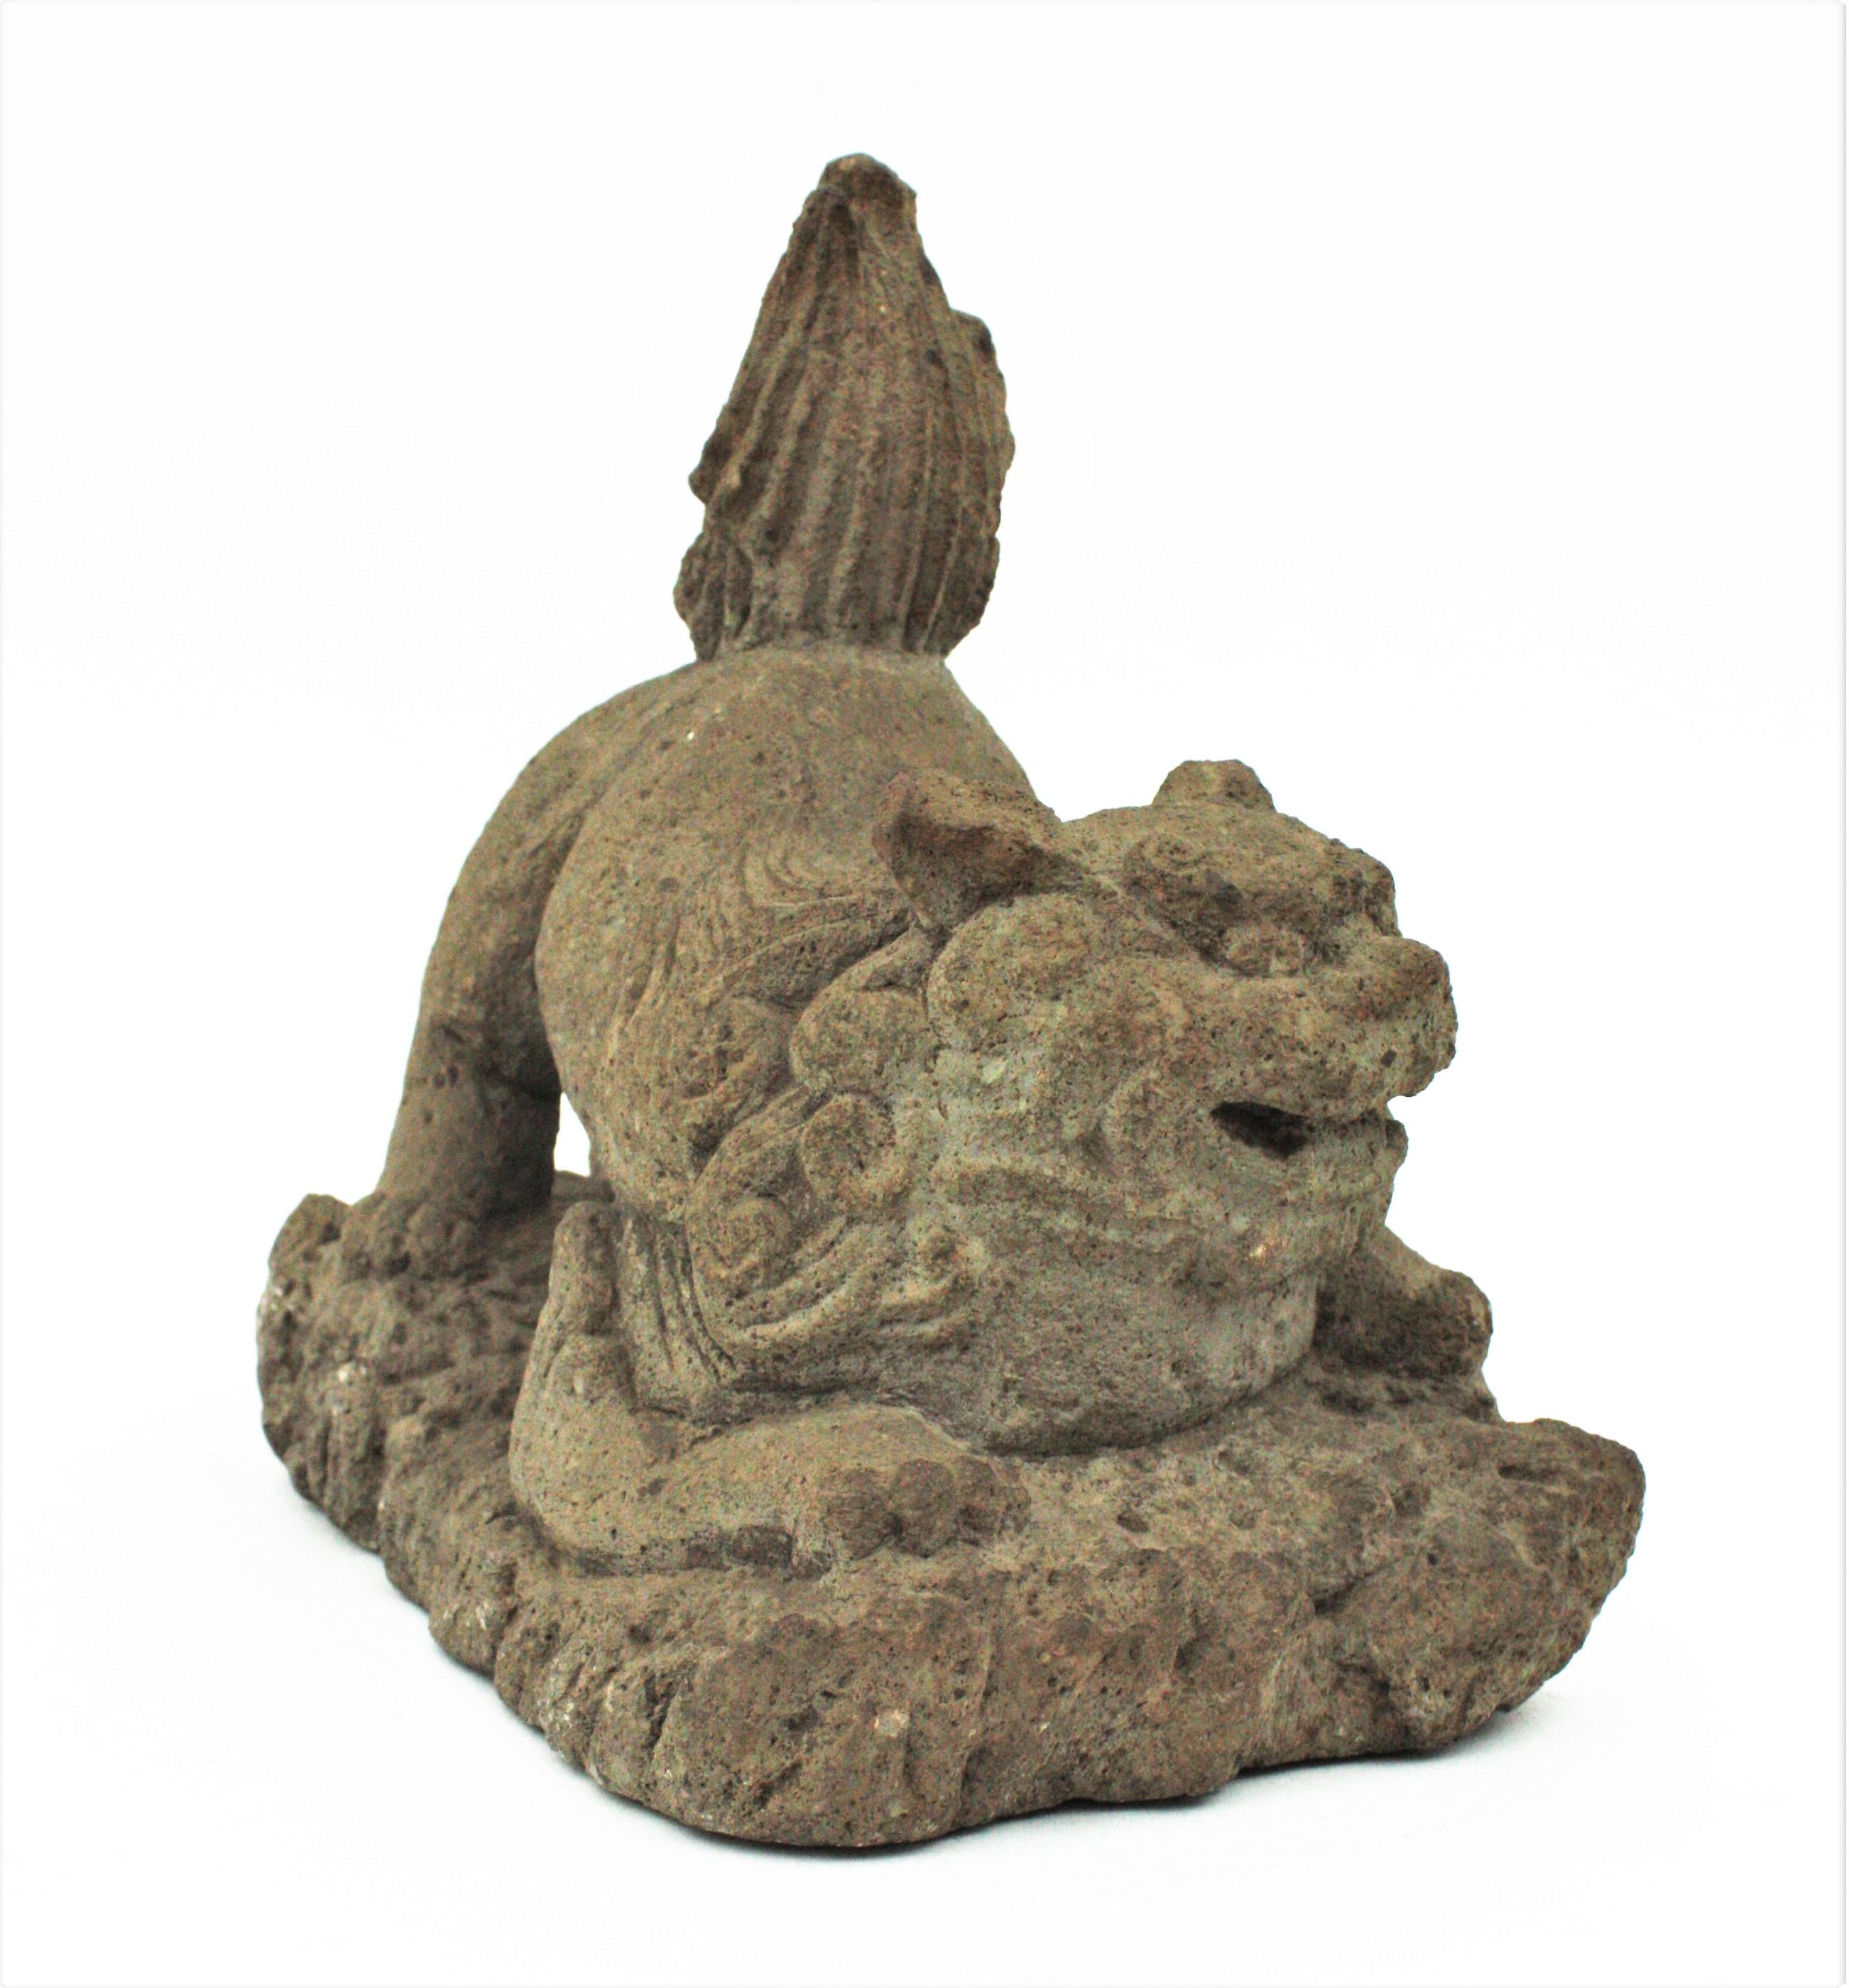 Spanish Carved Stone Garden Sculpture inspired in Guardian Lion Foo Dogs from Chinese Culture, 1950s-1960s.
Beautiful to be used outdoor as garden ornamentation or indoor exhibited as an sculpture in a console table or pedestal.
Interesting for